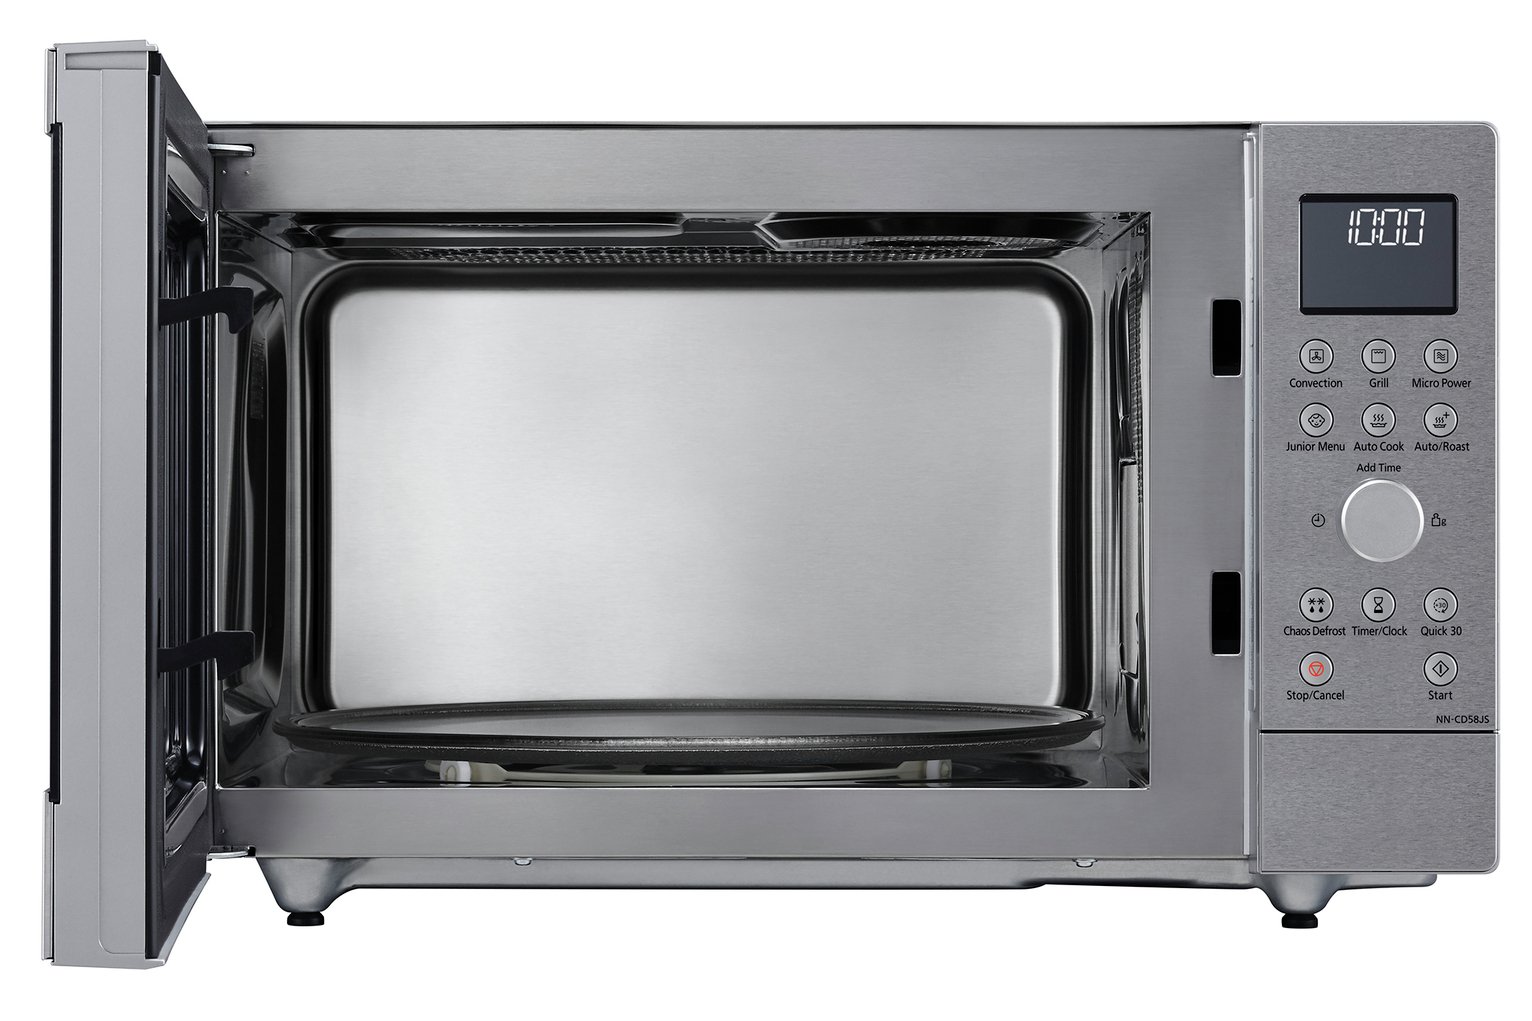 Panasonic 1000W Combination Microwave Oven 27L NN-CD58-Steel Review